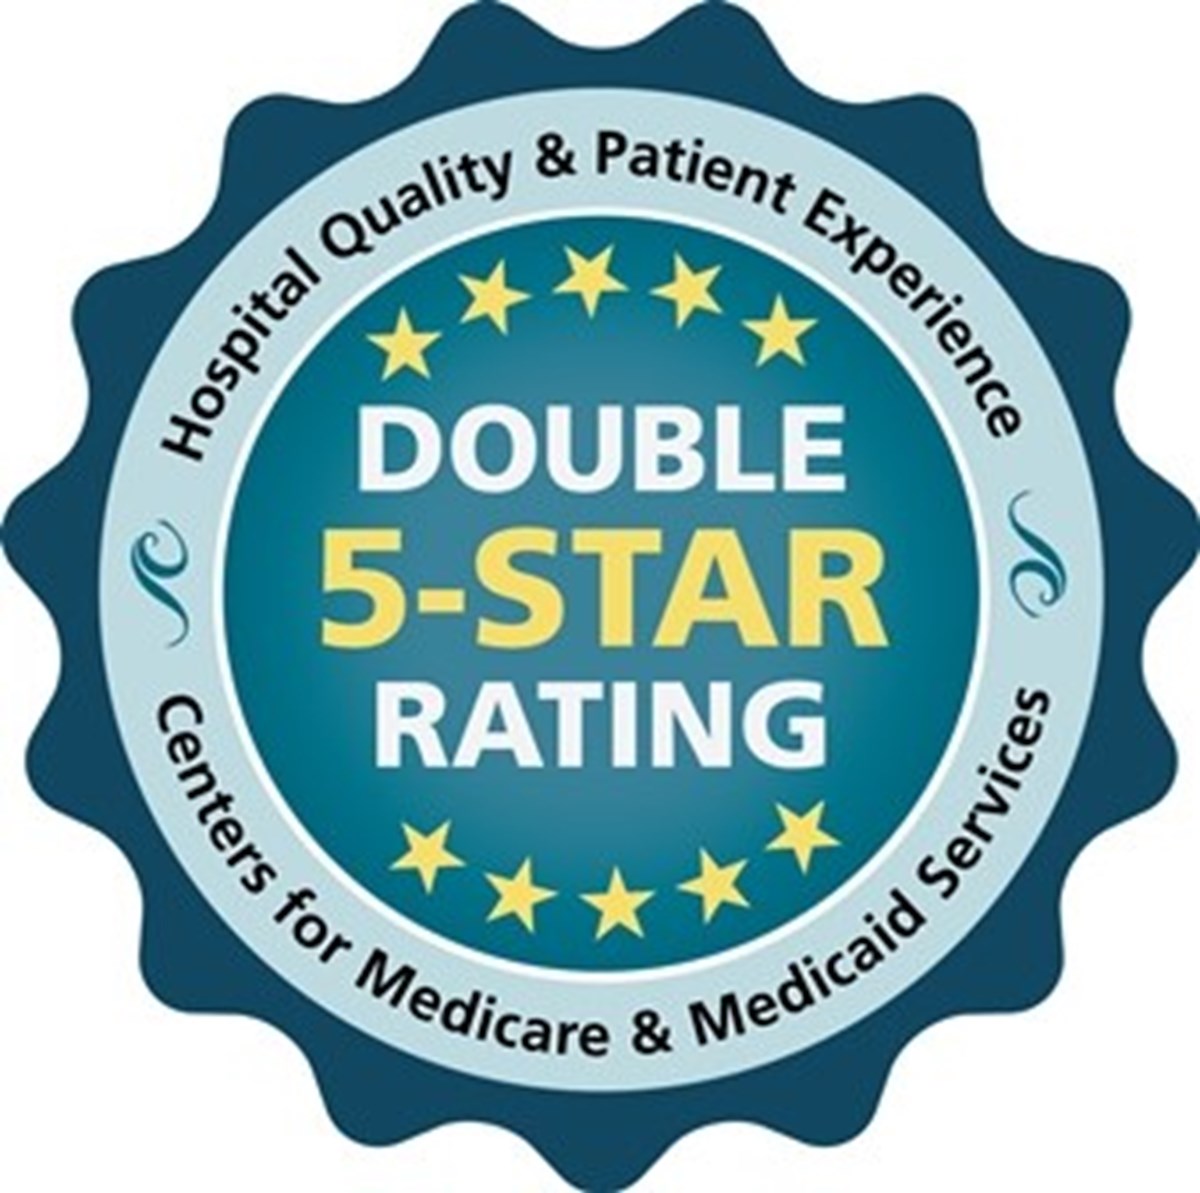 SCH rated among top in nation for Quality and Patient Experience